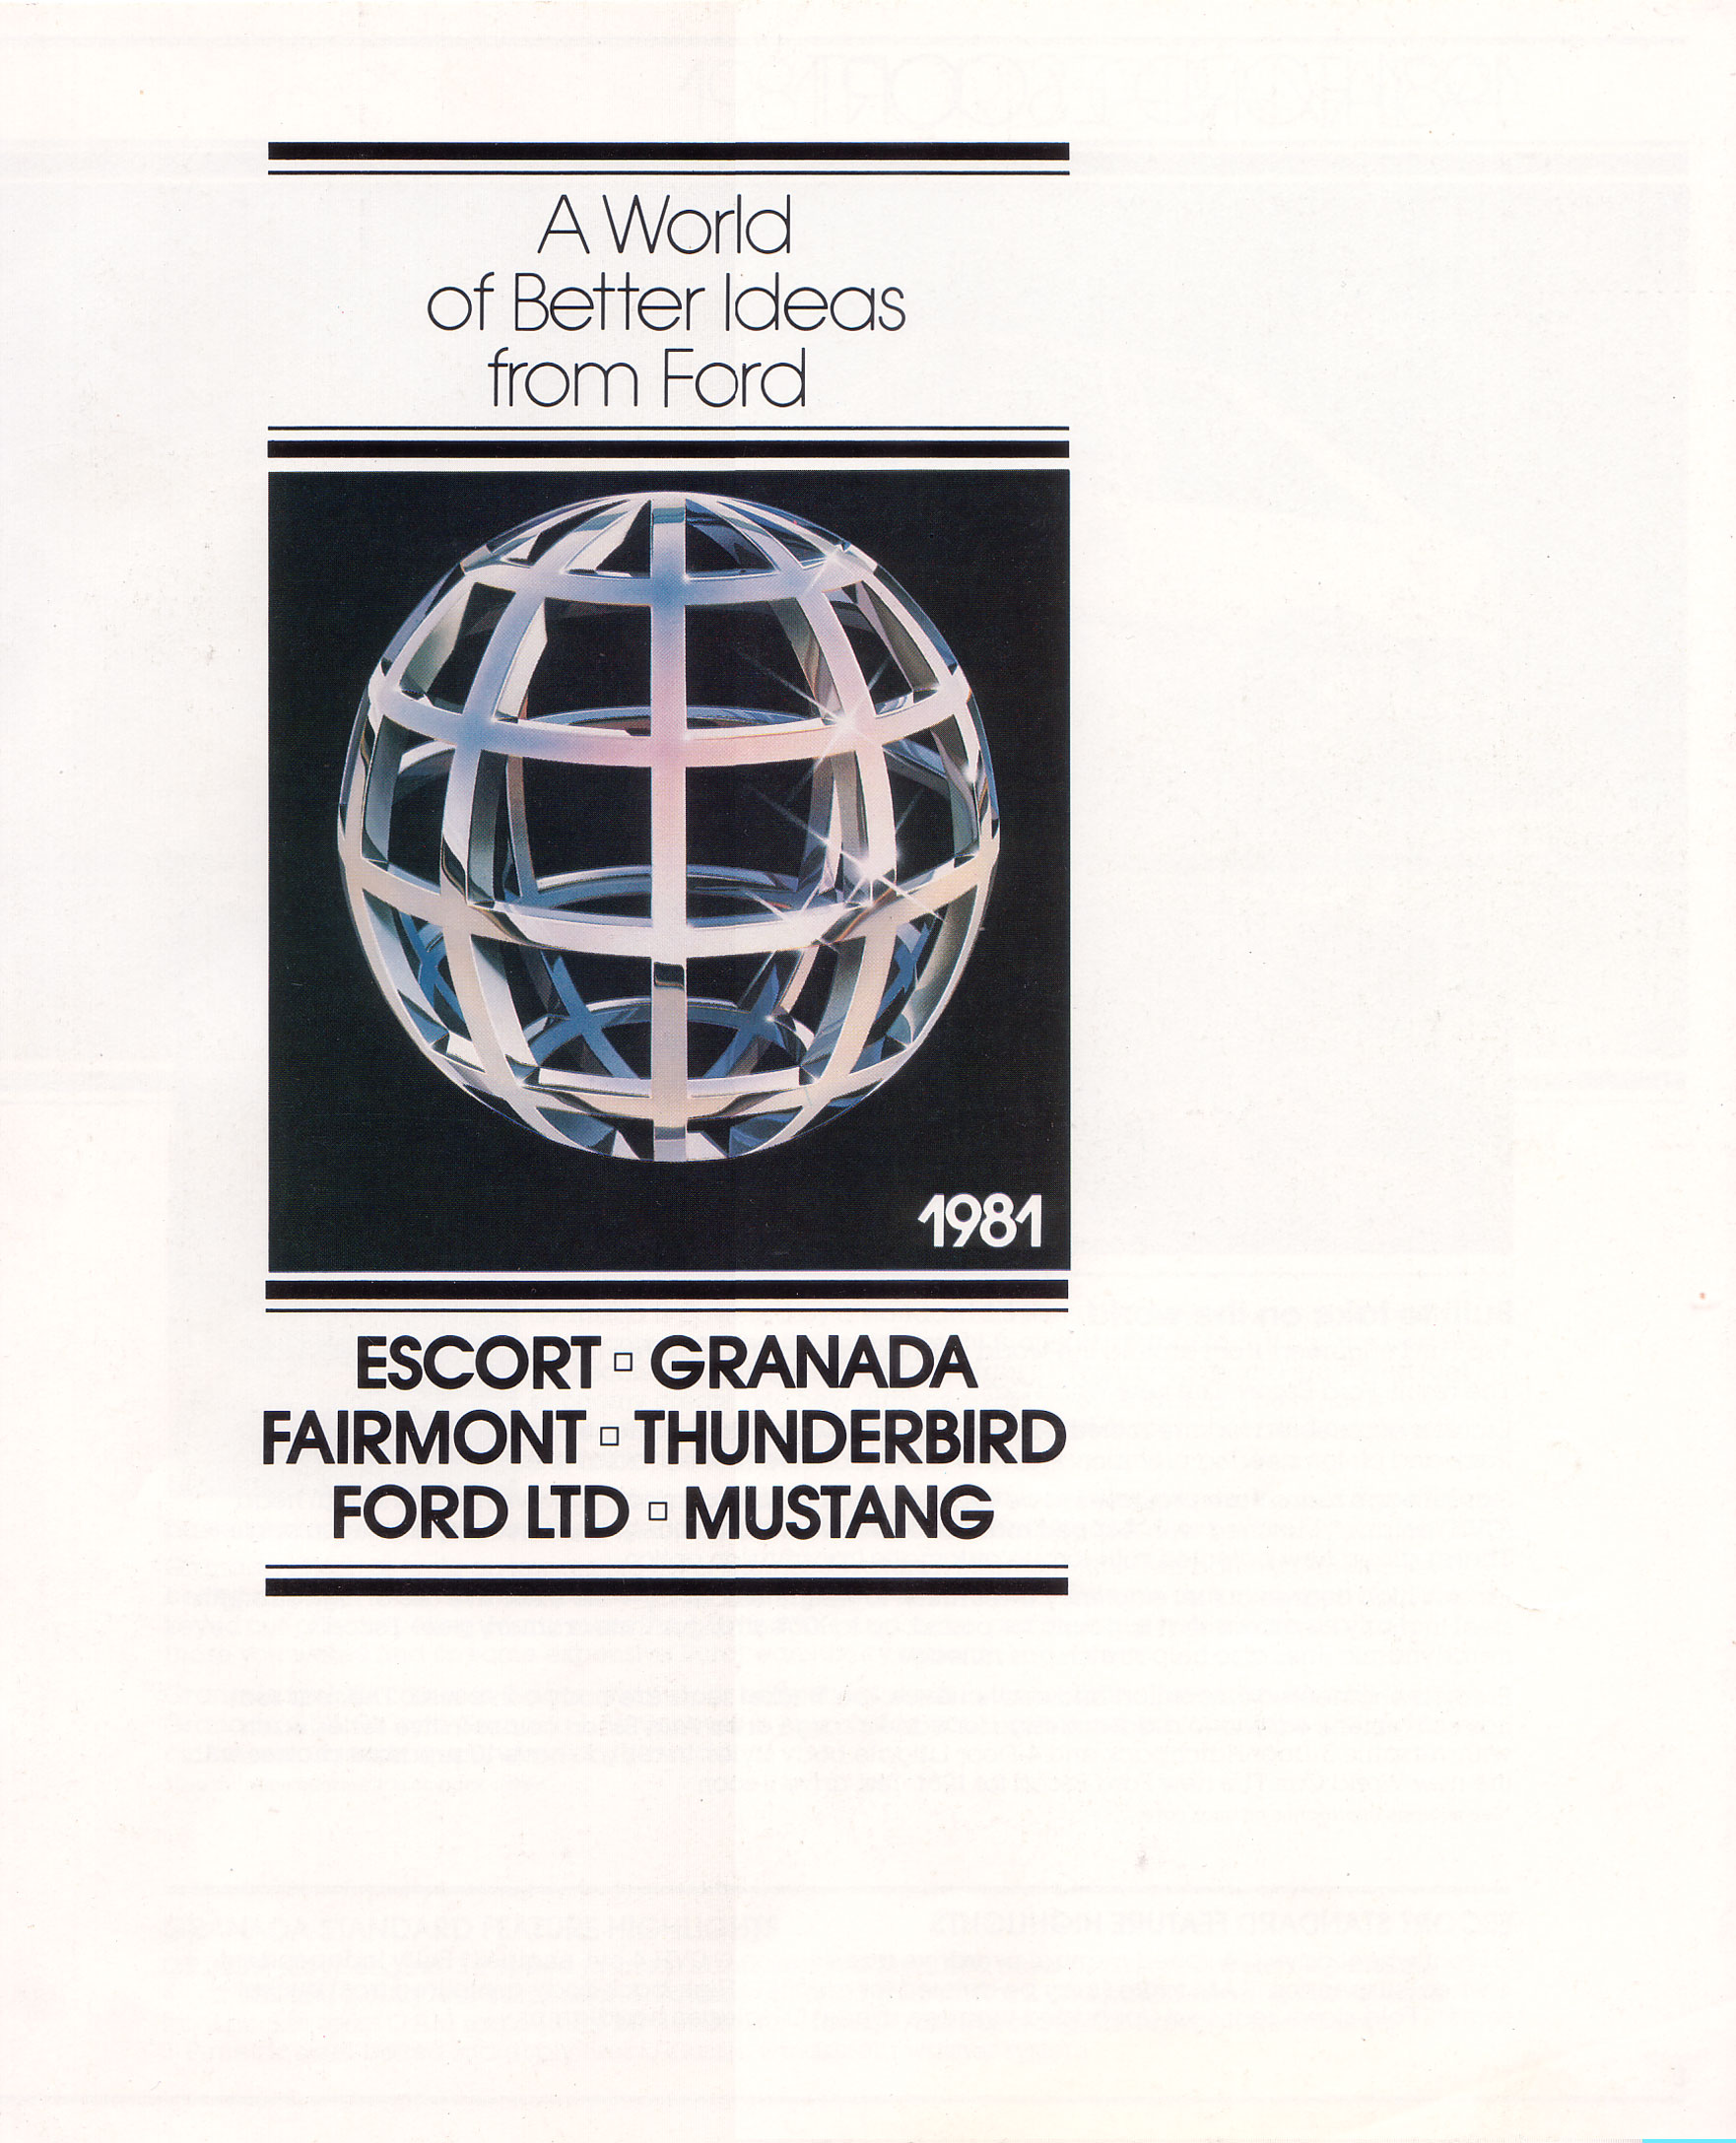 1981_Ford_Better_Ideas-01